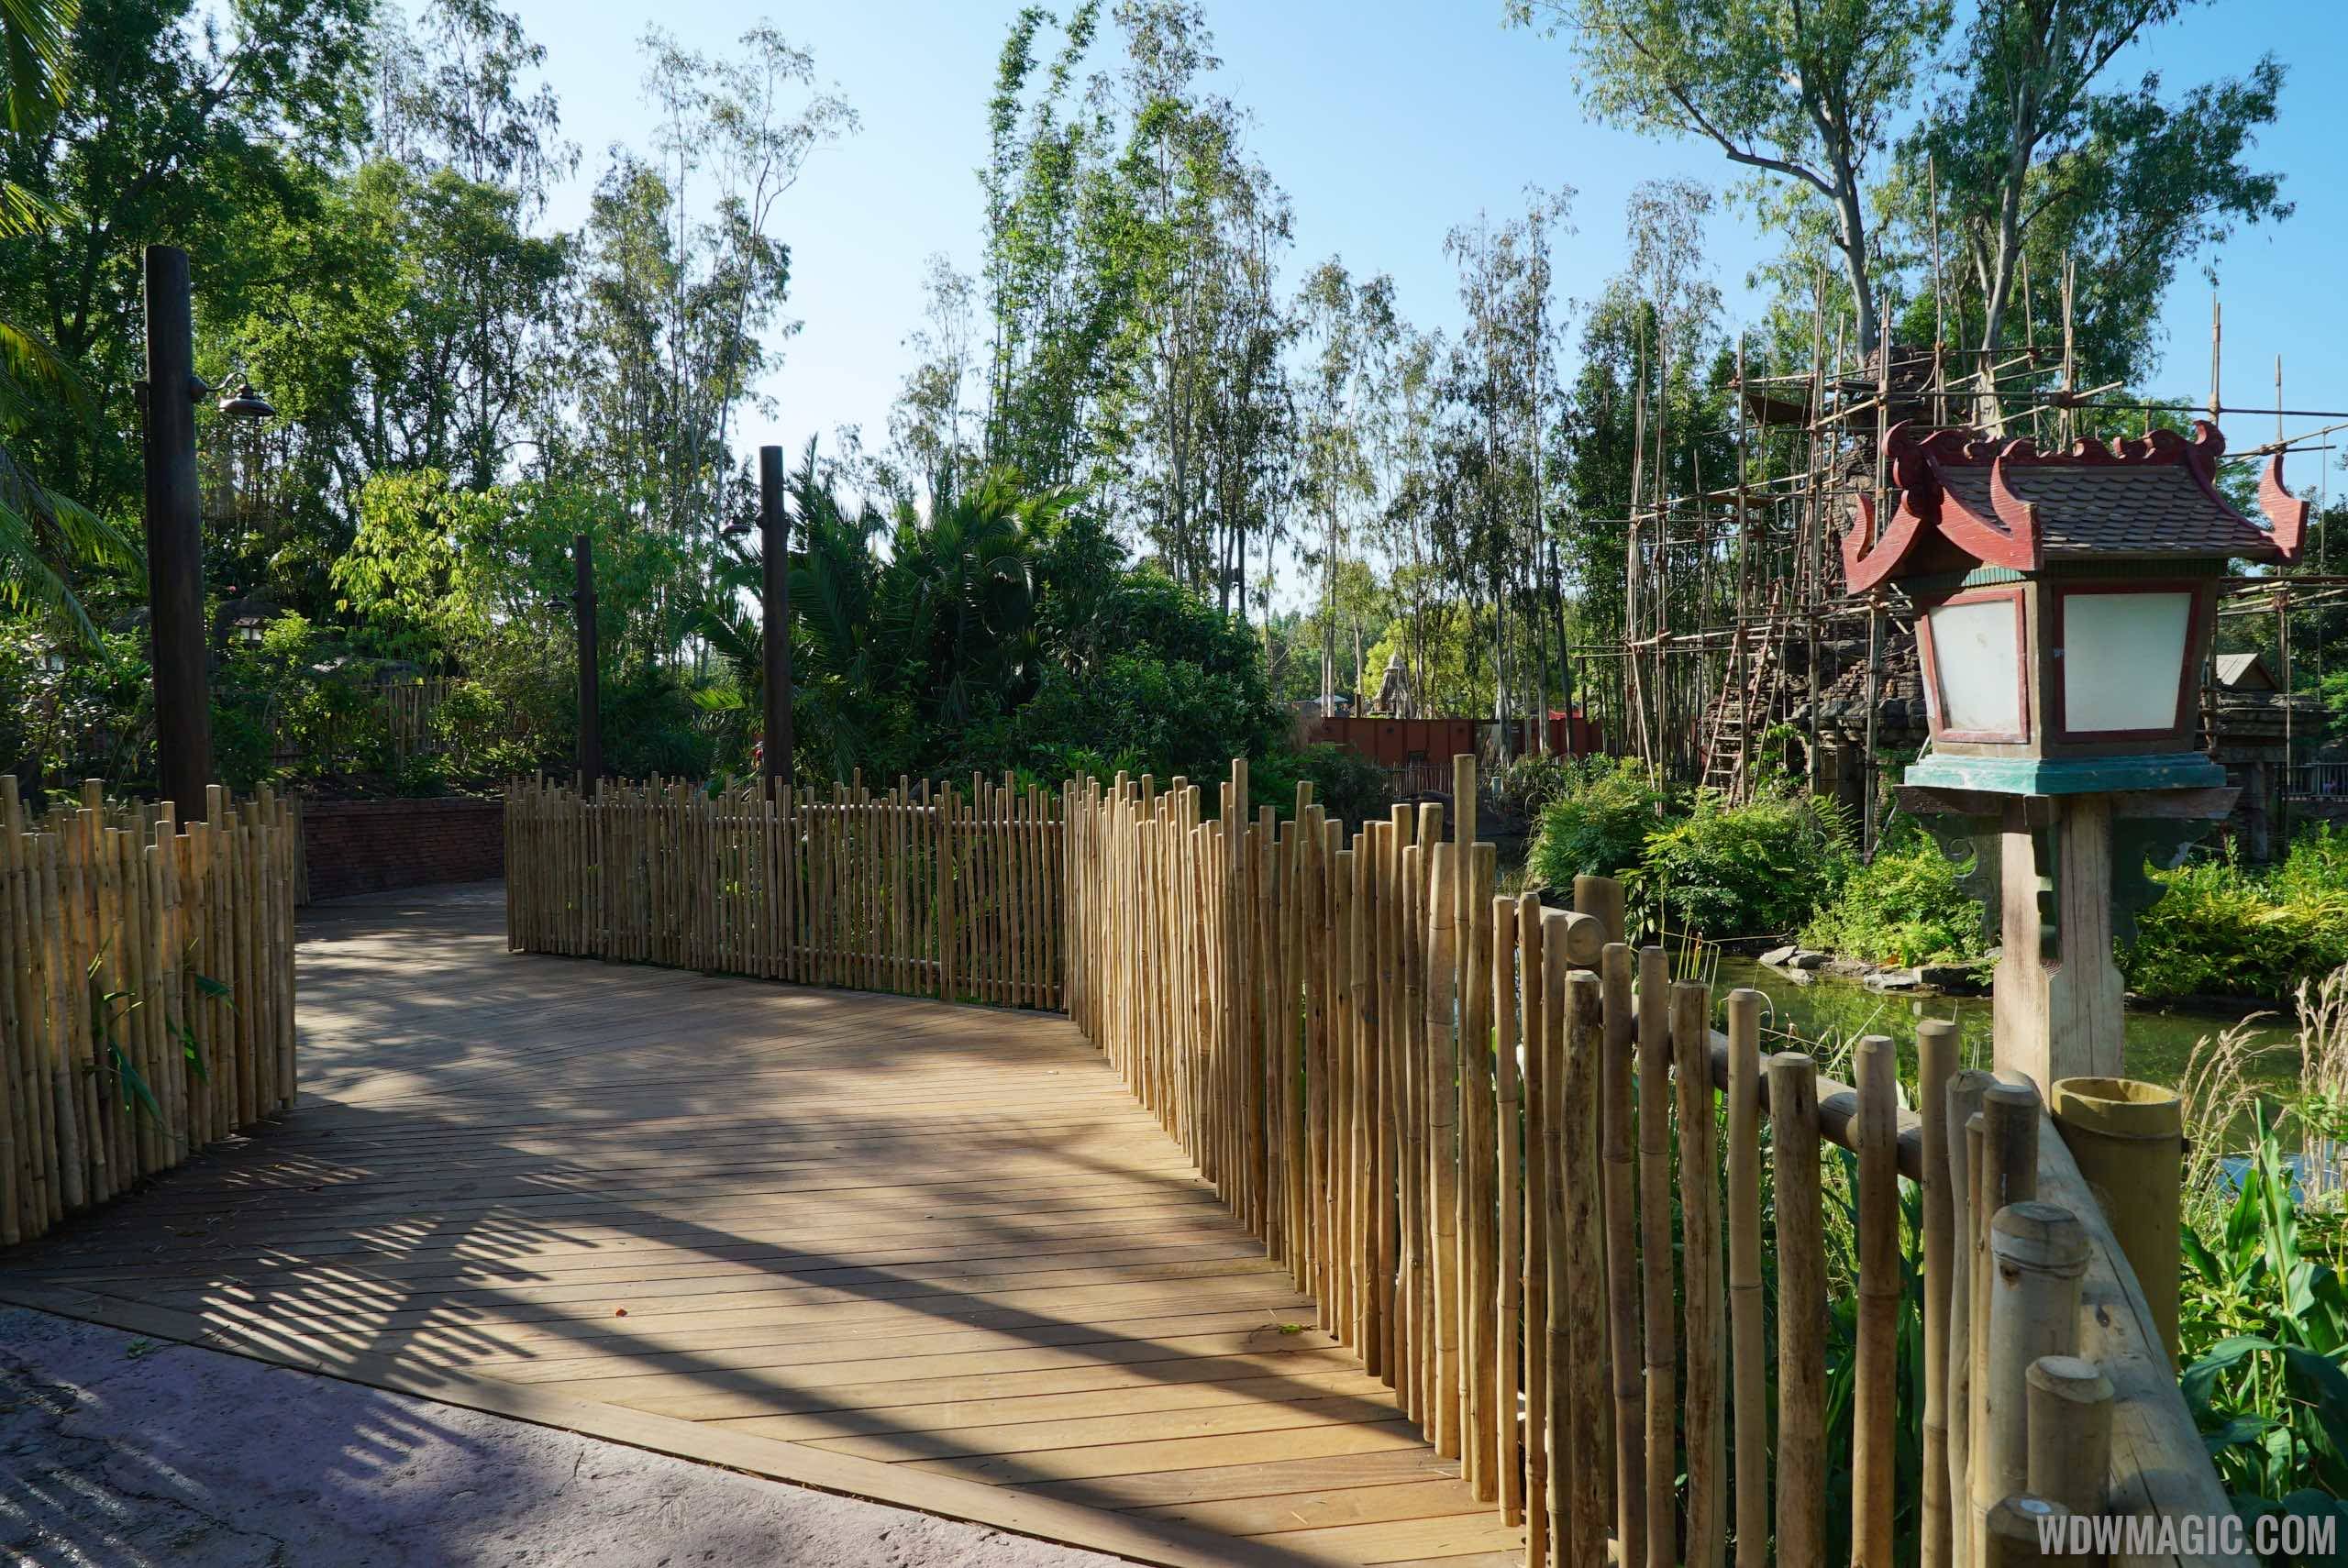 New Asia walkway - Waking from Kali Rapids towards Everest